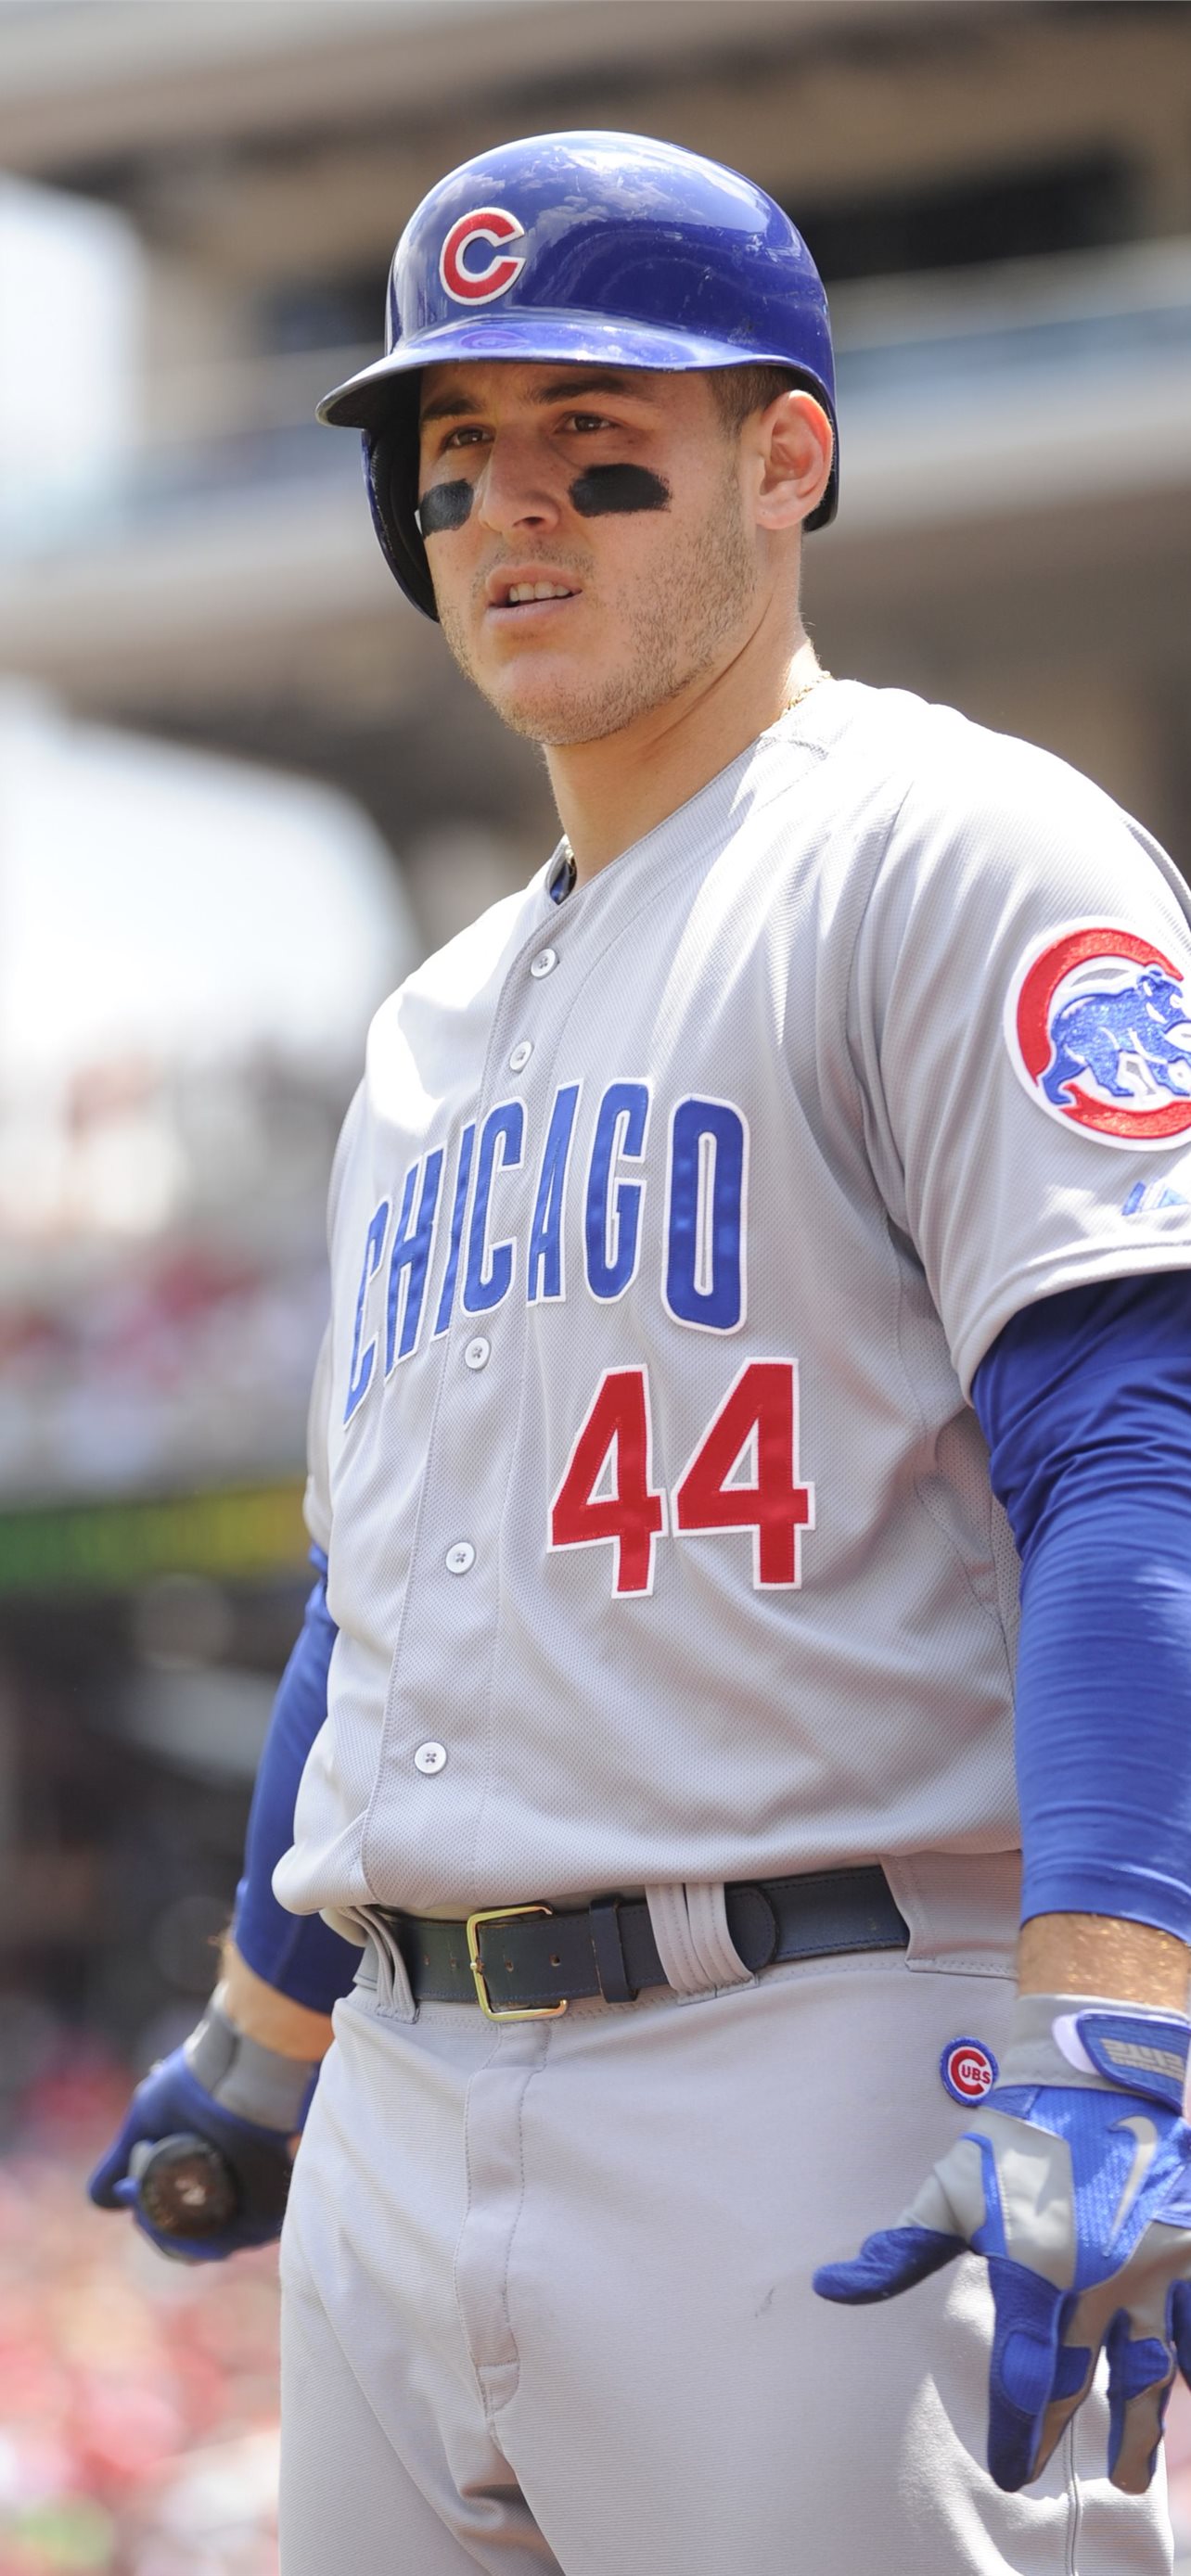 Anthony Rizzo wallpaper by nick22222222222 - Download on ZEDGE™